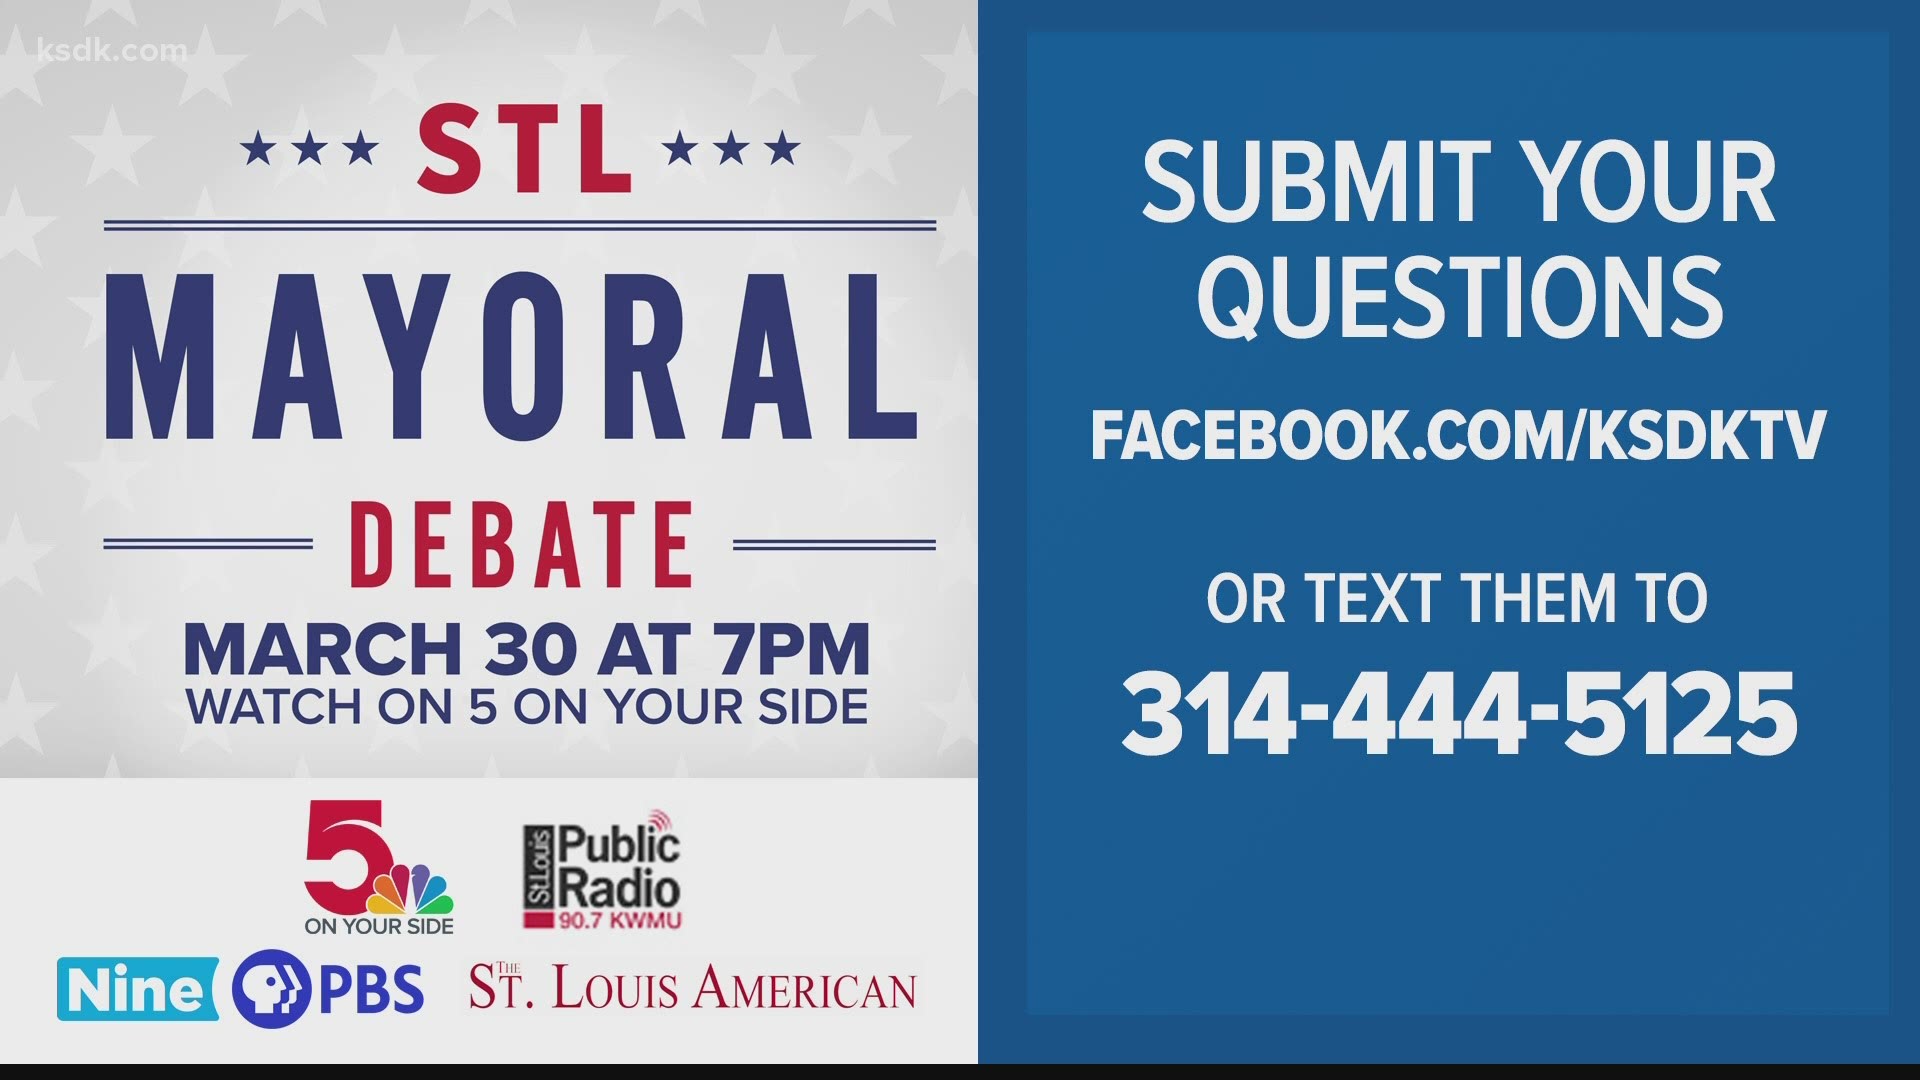 In one week, voters in St. Louis will decide who will be the next mayor.